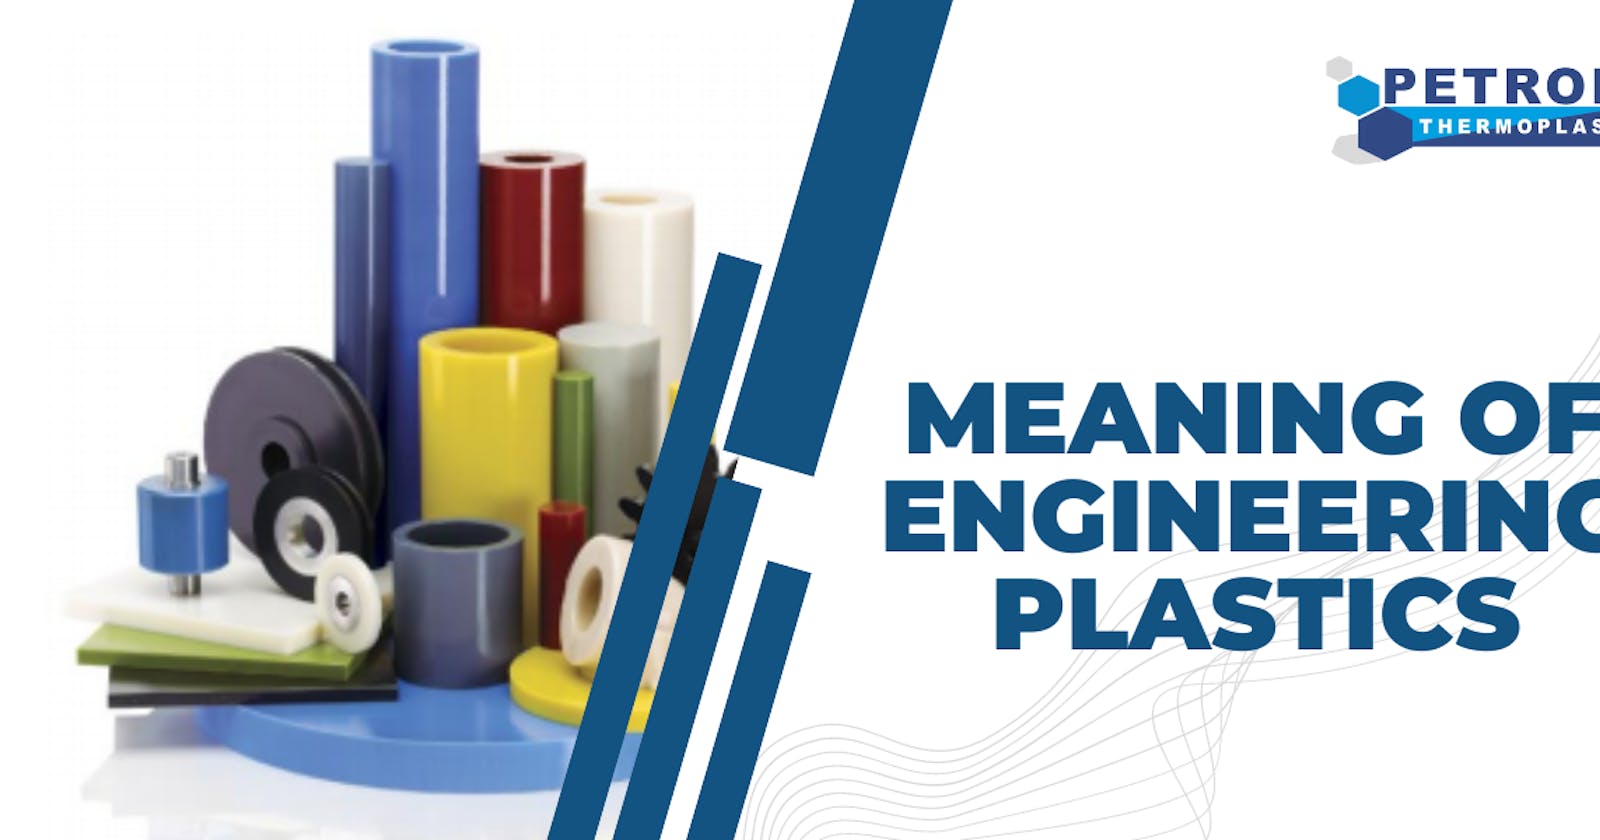 What is the Meaning of Engineering Plastics?